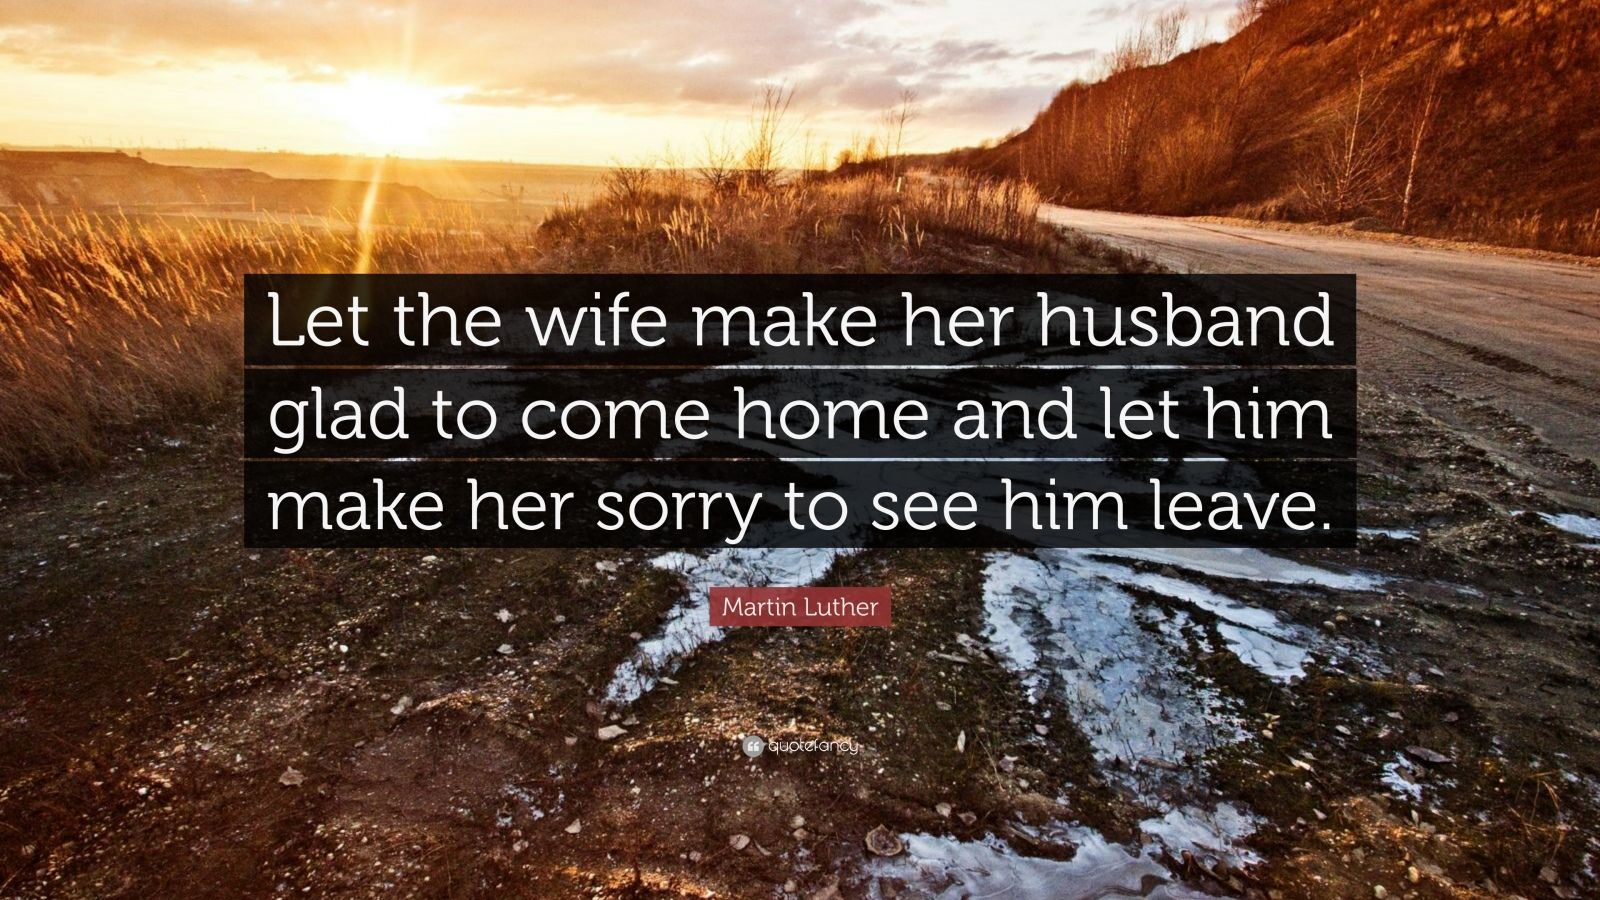 Martin Luther Quote “Let the wife make her husband glad